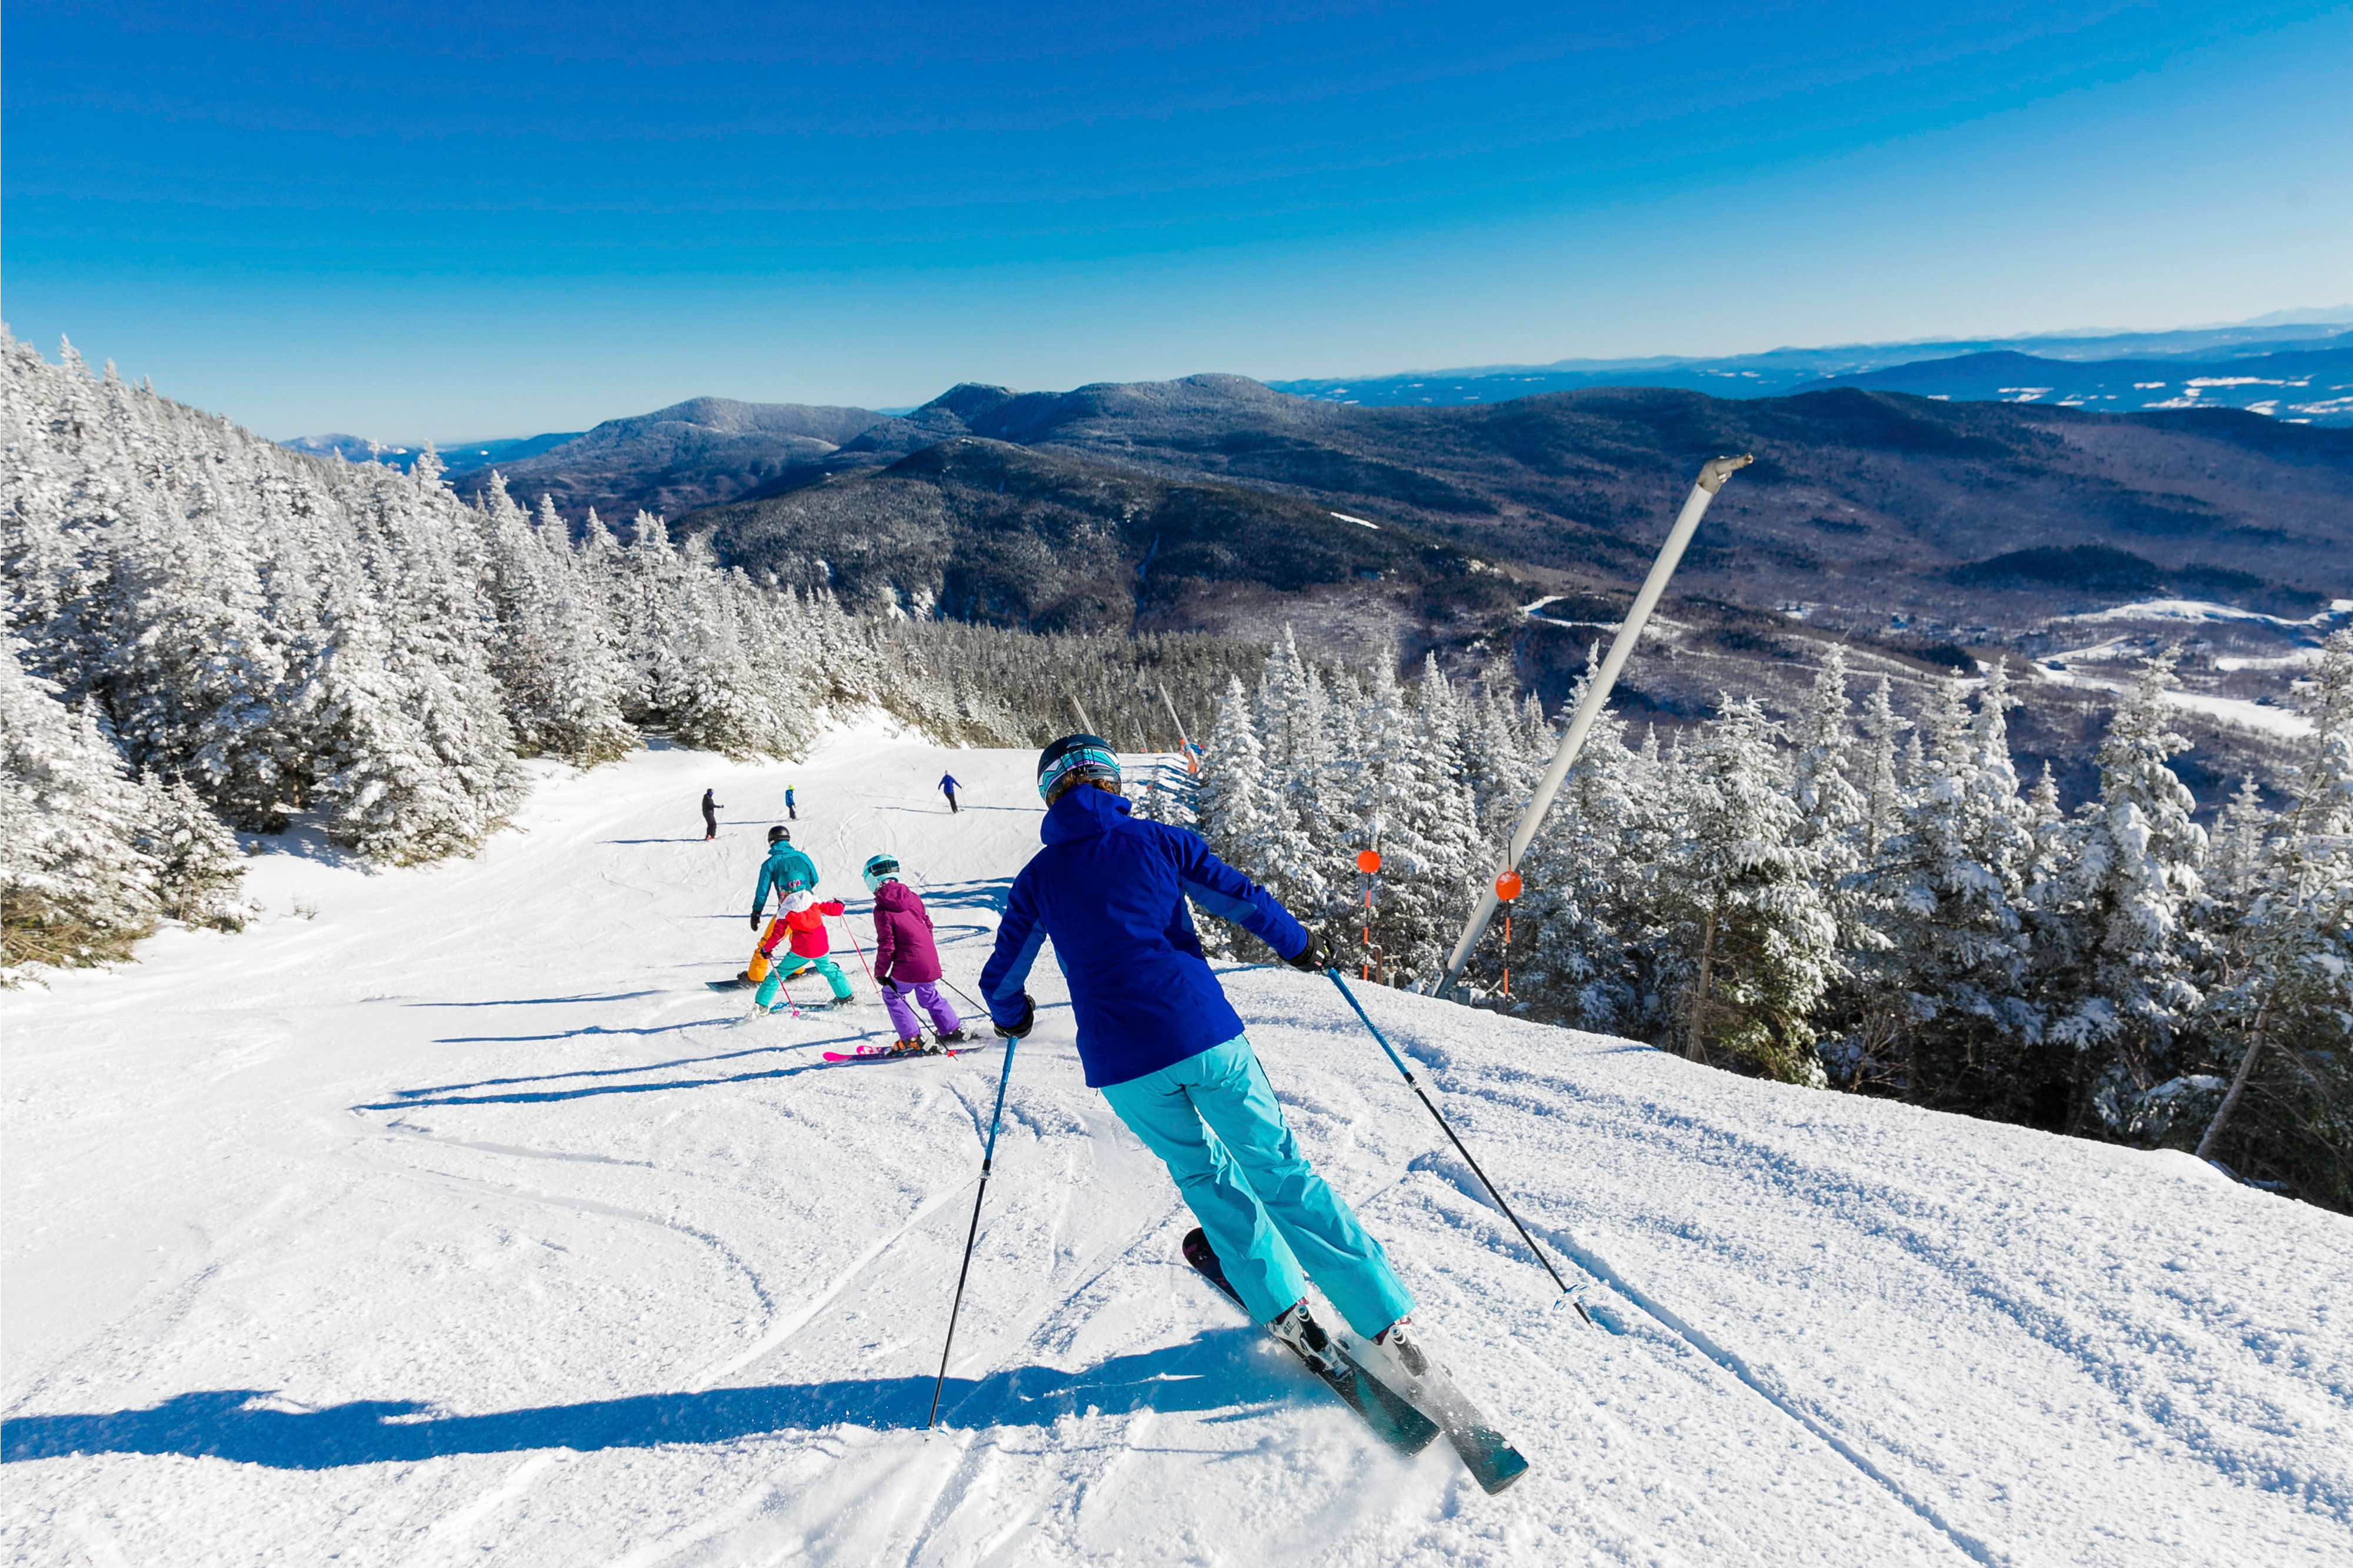 Family skis together in Stowe, VT.